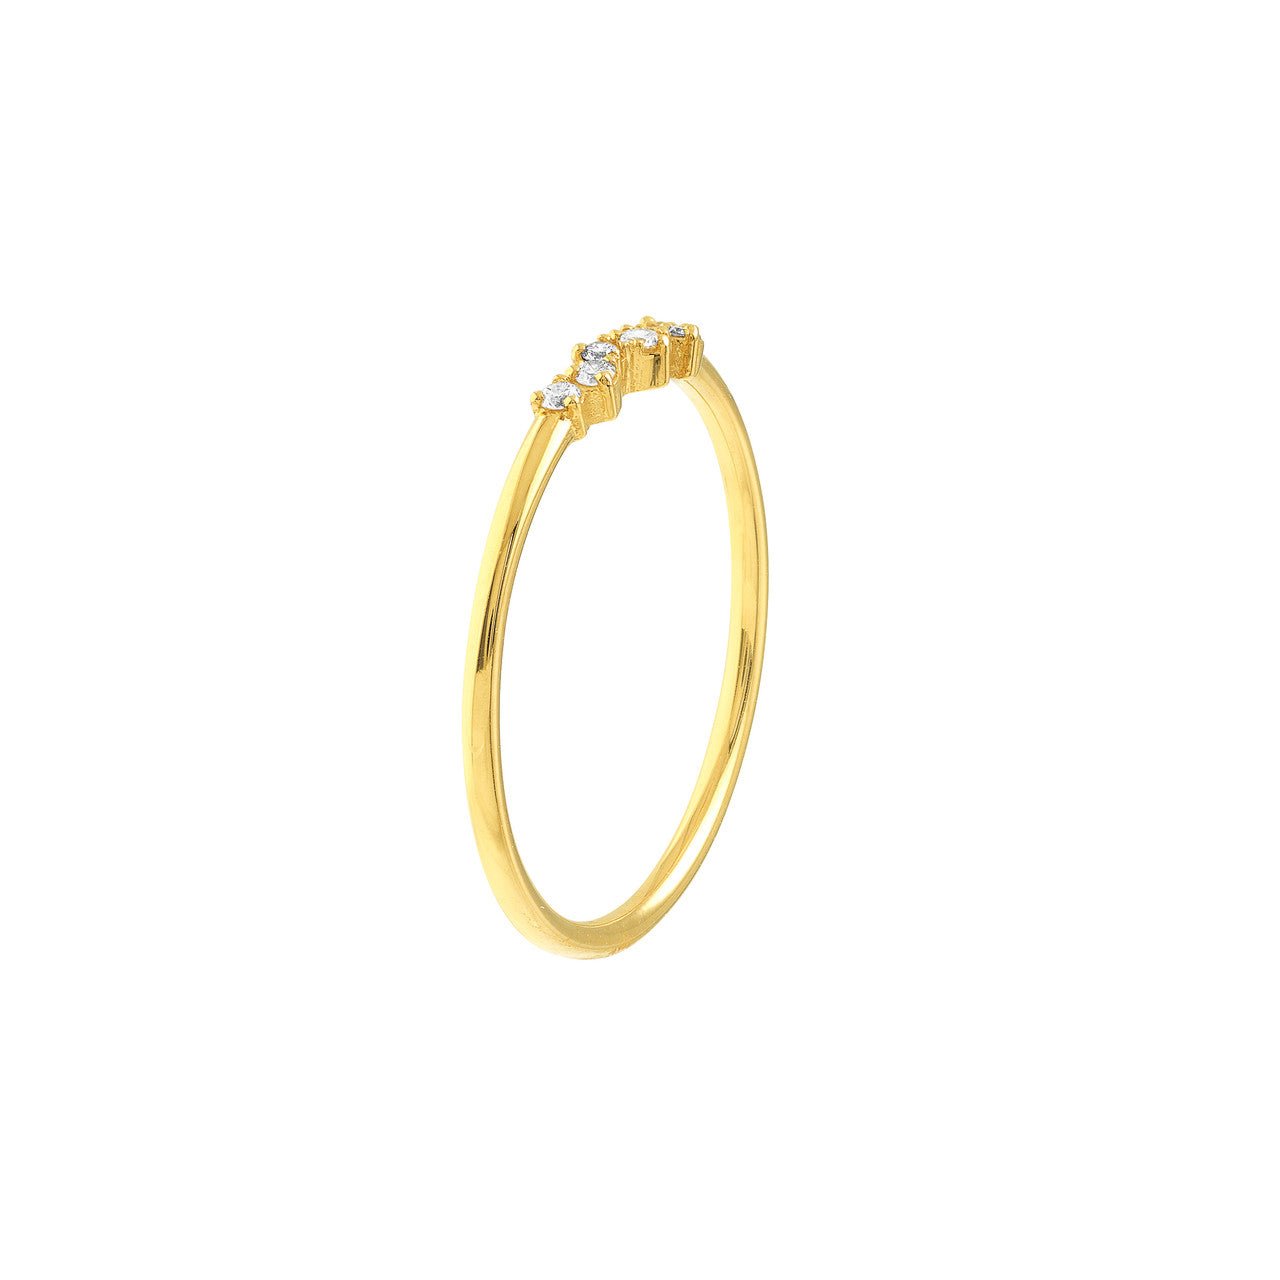 Buy Gold Design Gold Plated Light Weight Rings for Women